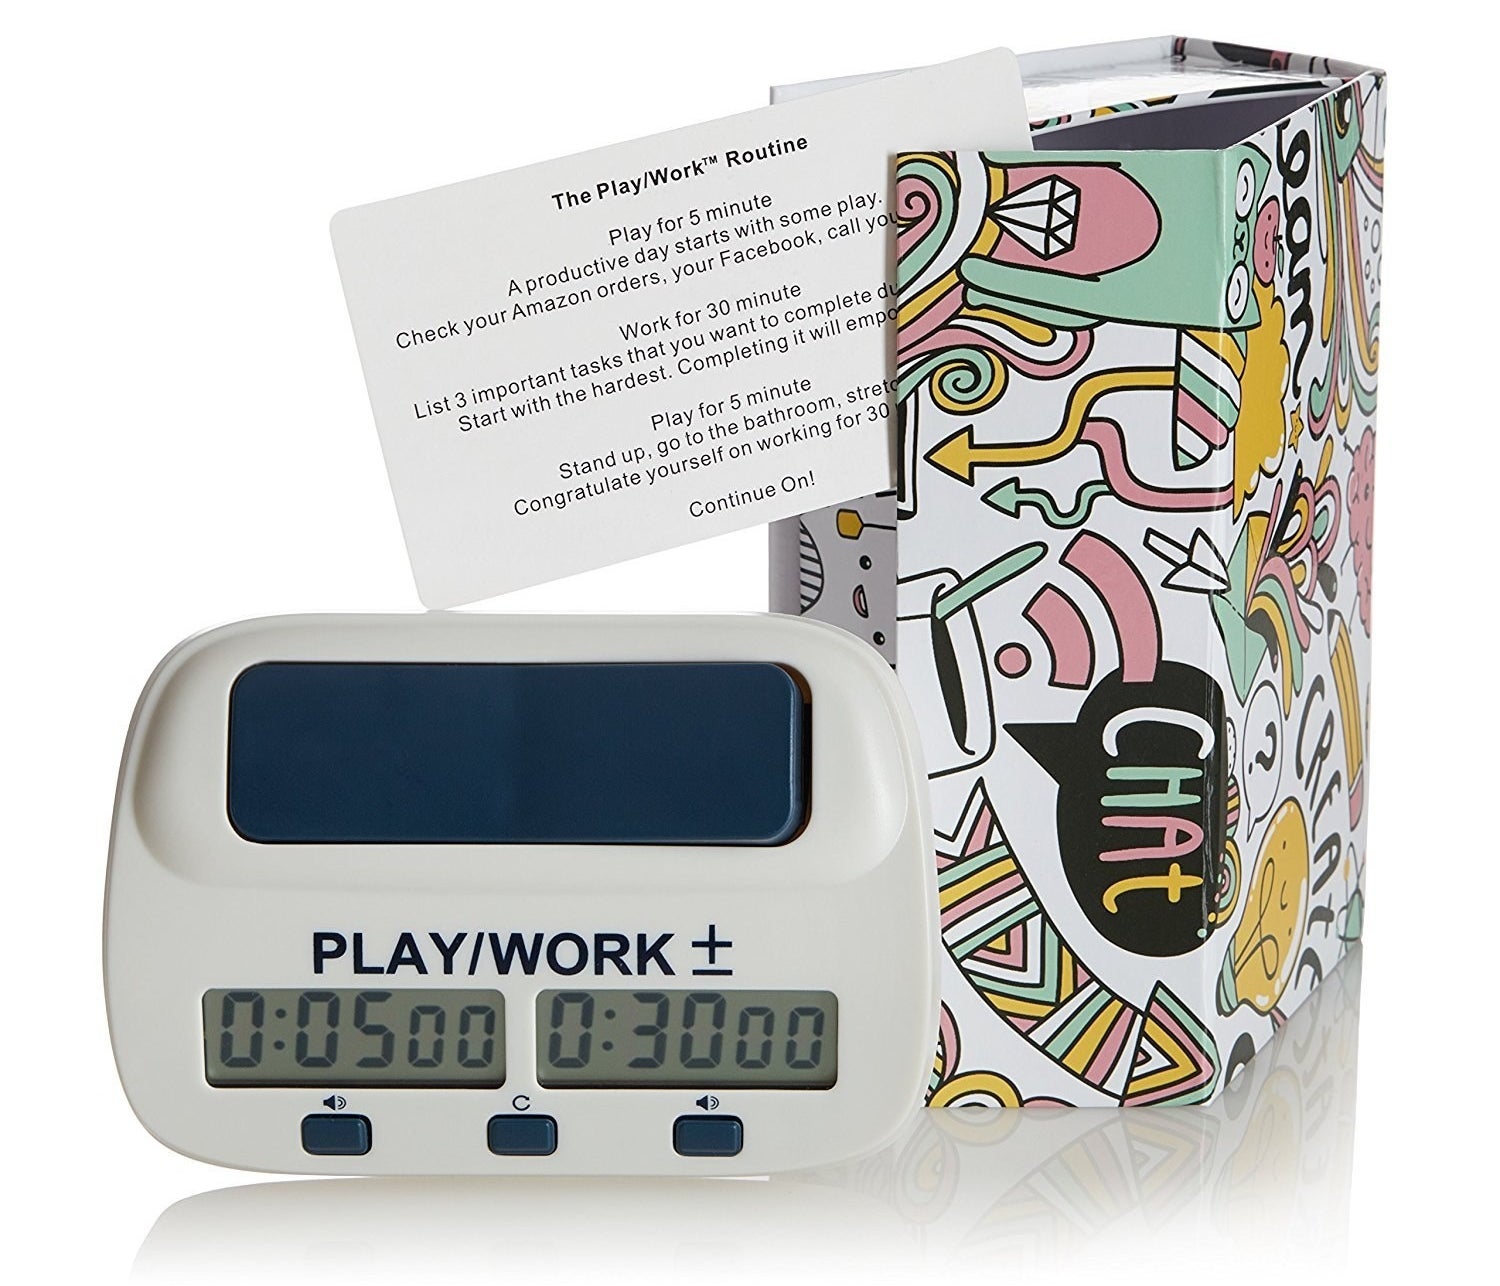 The timer sitting next to its packaging showing five minutes on the &quot;play&quot; side and 30 minutes on the &quot;work&quot; side